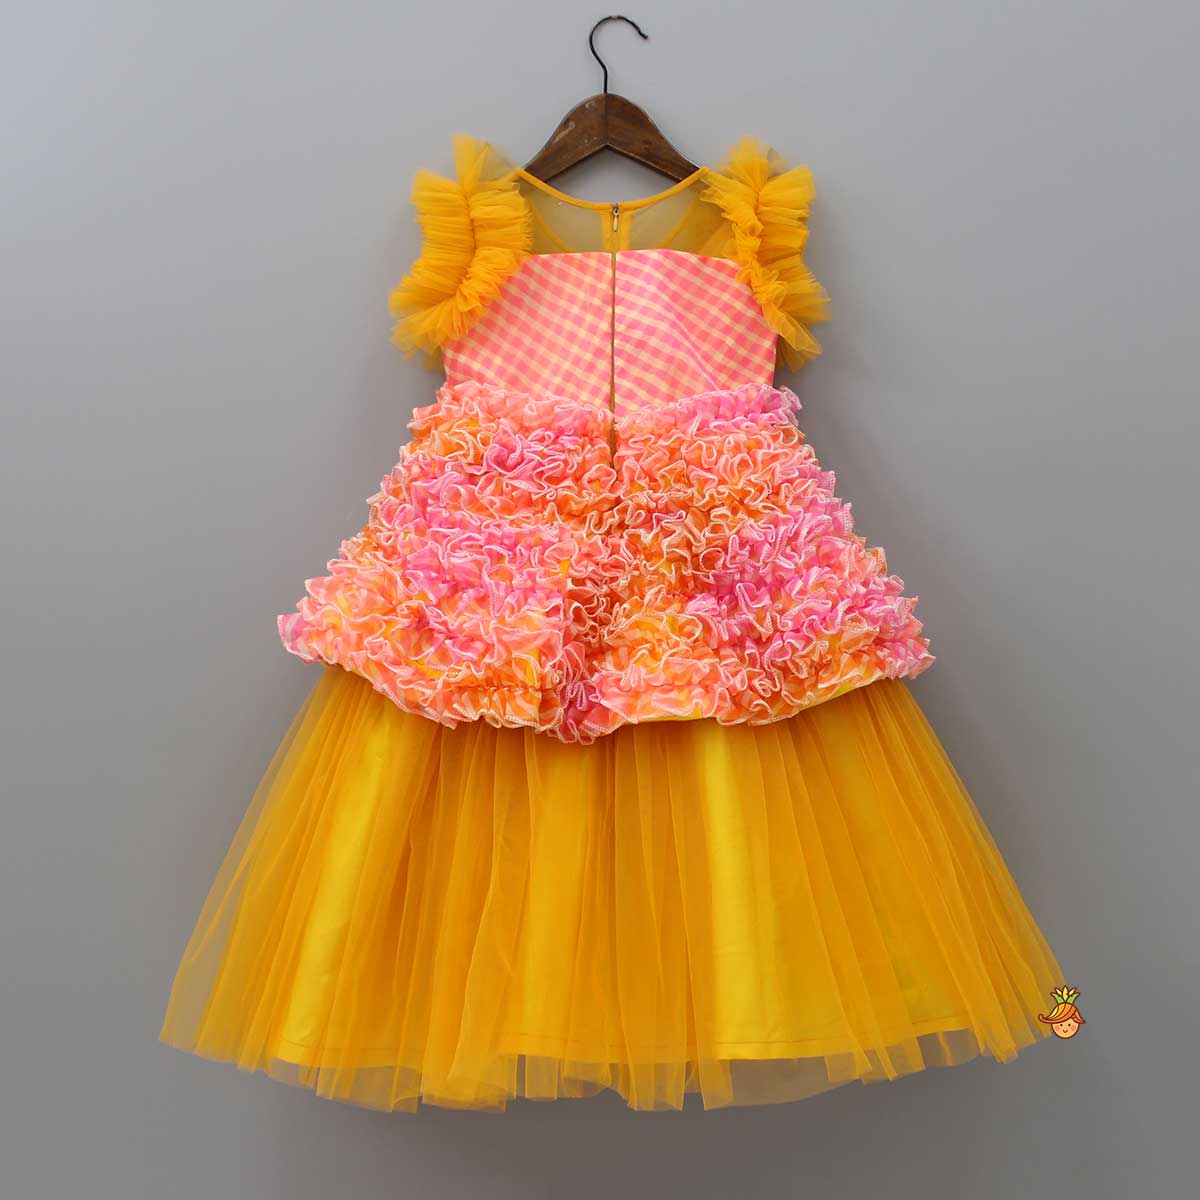 Multicolored Ruffle Net Dress With Matching Bow Clip